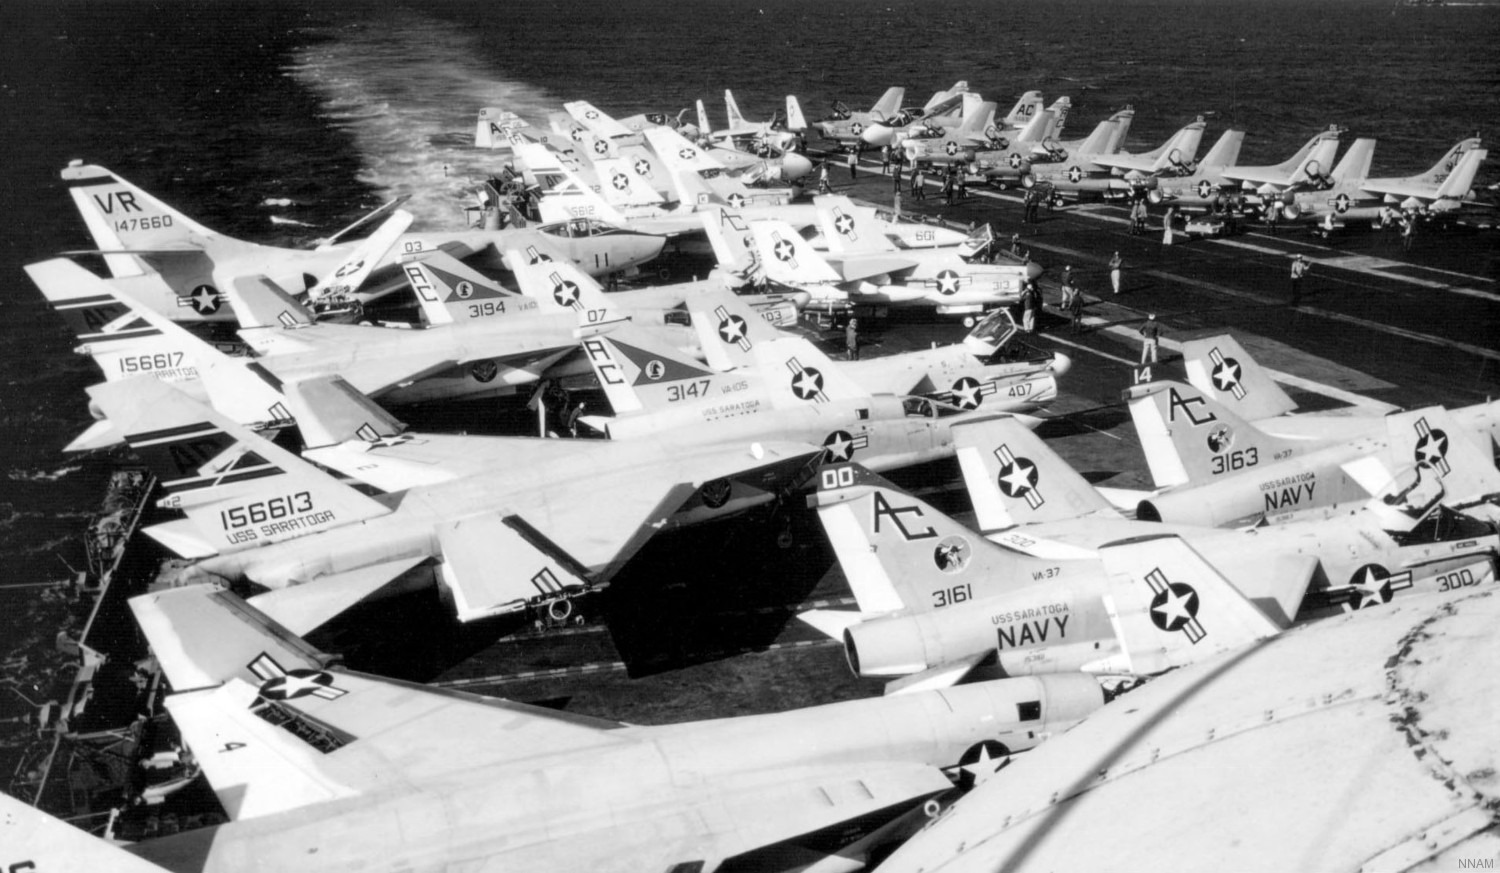 cvw-3 carrier air wing us navy uss saratoga cva-60 embarked squadrons 36